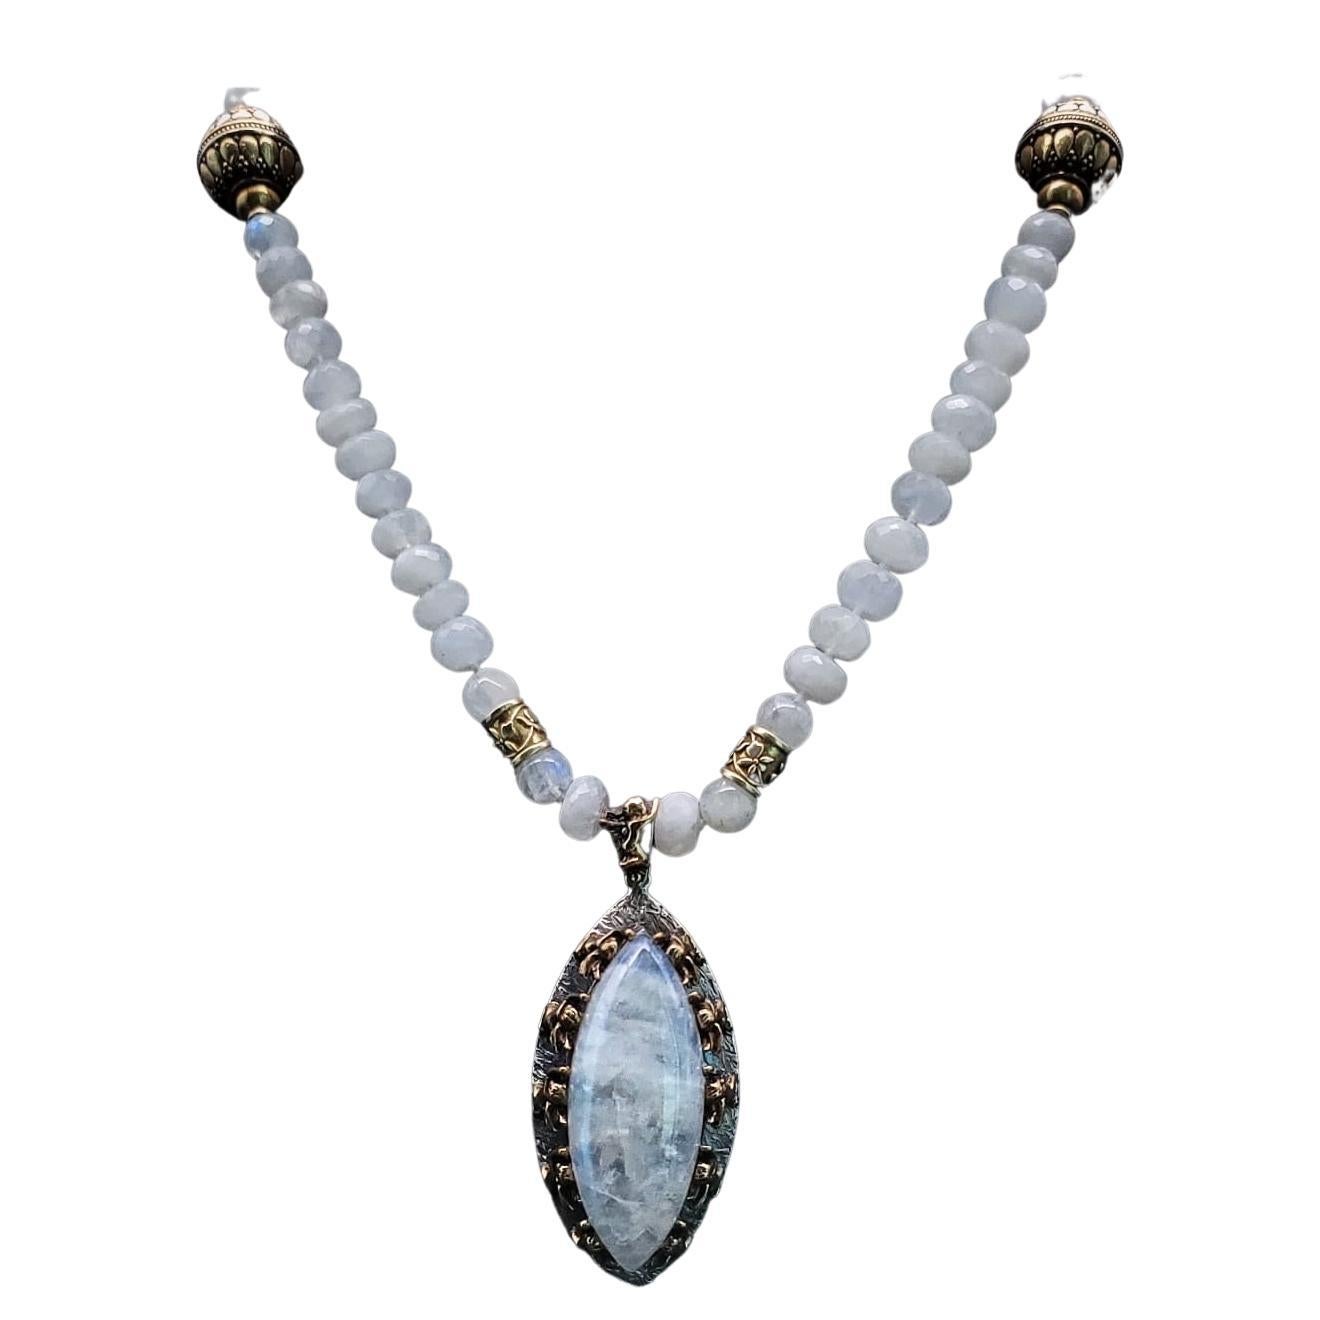 A.Jeschel Rainbow Moonstone necklace set in a beautiful hand-crafted pendant.